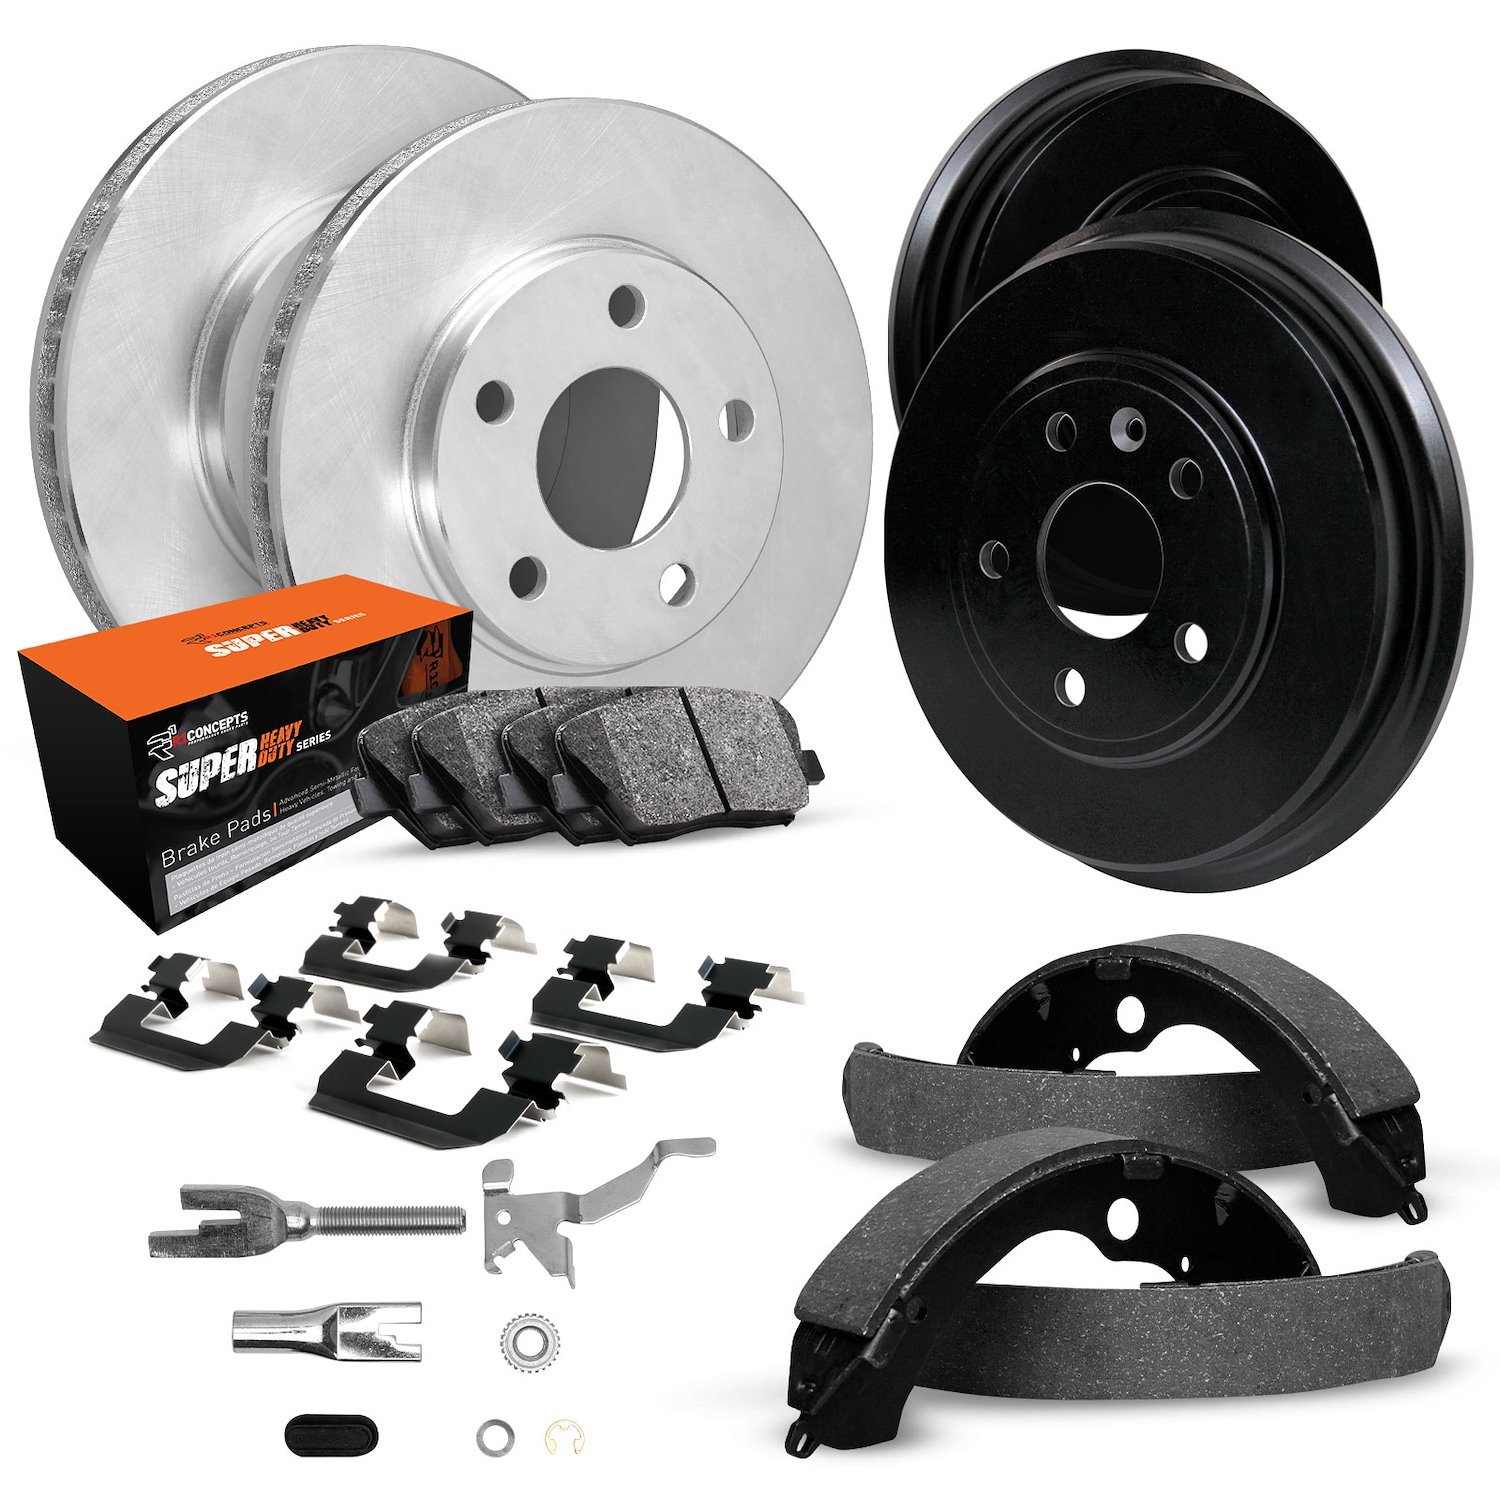 E-Line Blank Brake Rotor & Drum Set w/Super-Duty Pads, Shoes, Hardware, & Adjusters, 1991-1993 GM, Position: Front & Rear